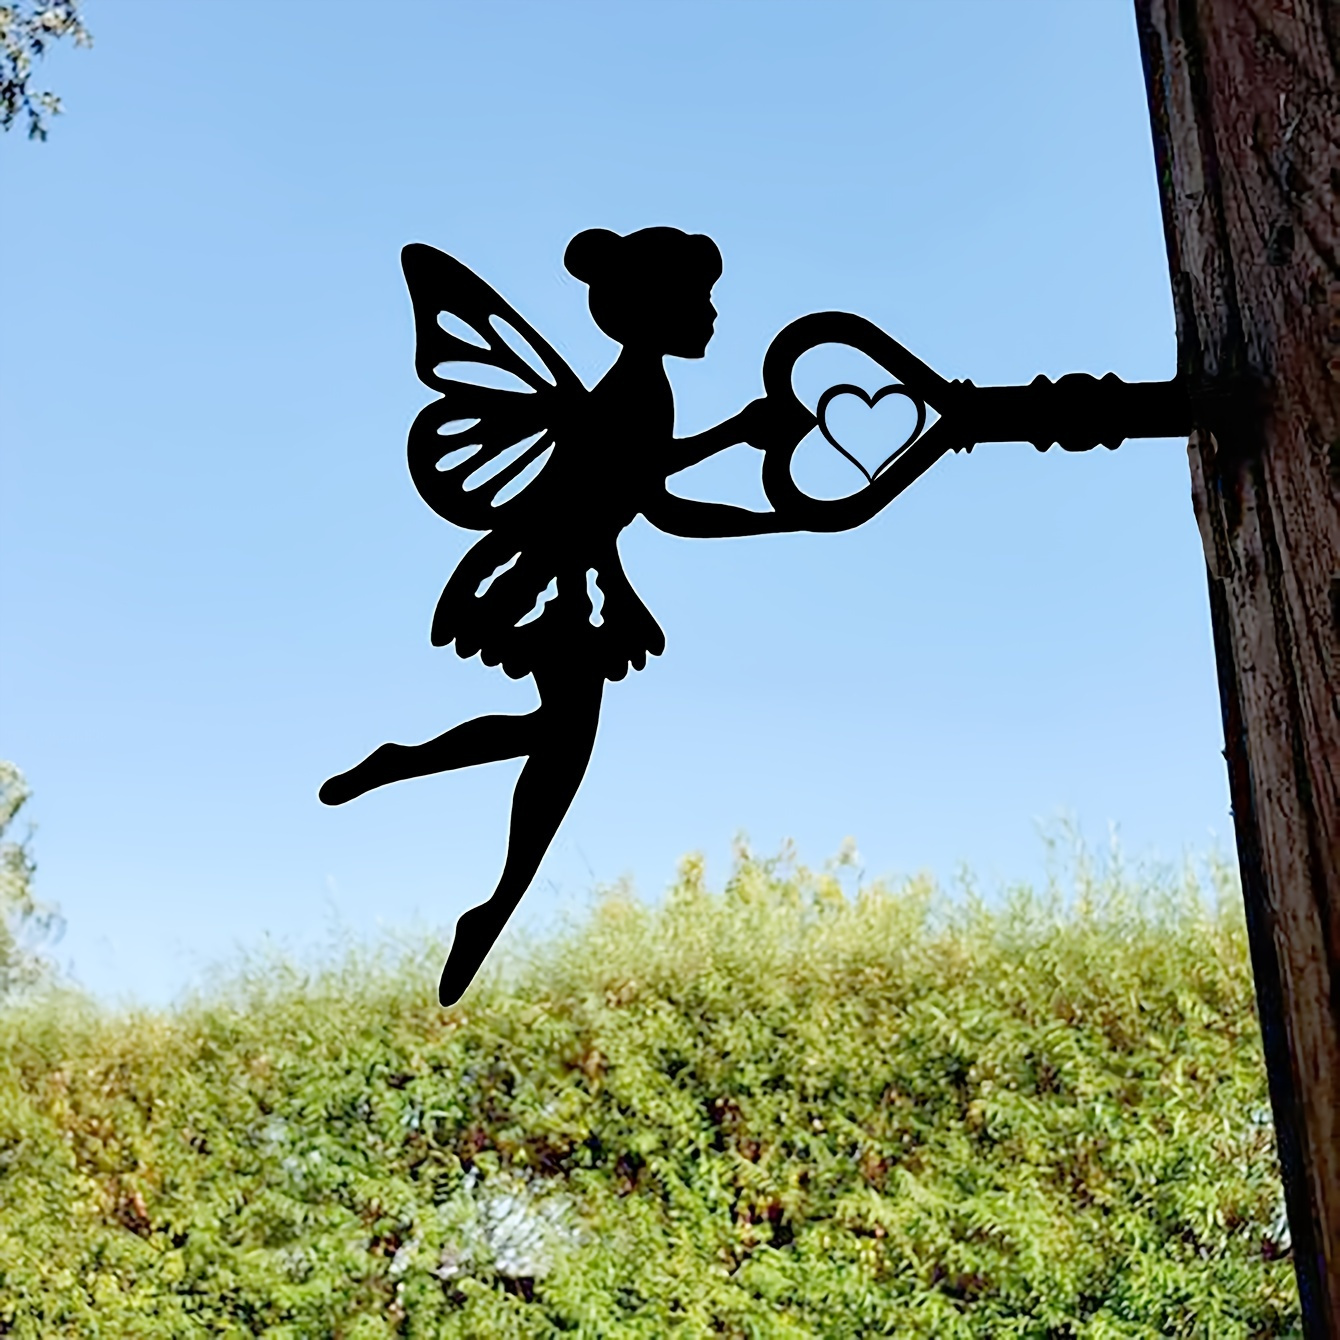 

1pc Angel On Branch Steel Silhouette Metal Wall Art Home Garden Yard Patio Outdoor Statue Stake Decoration Perfect For Birthdays, Housewarming Gifts